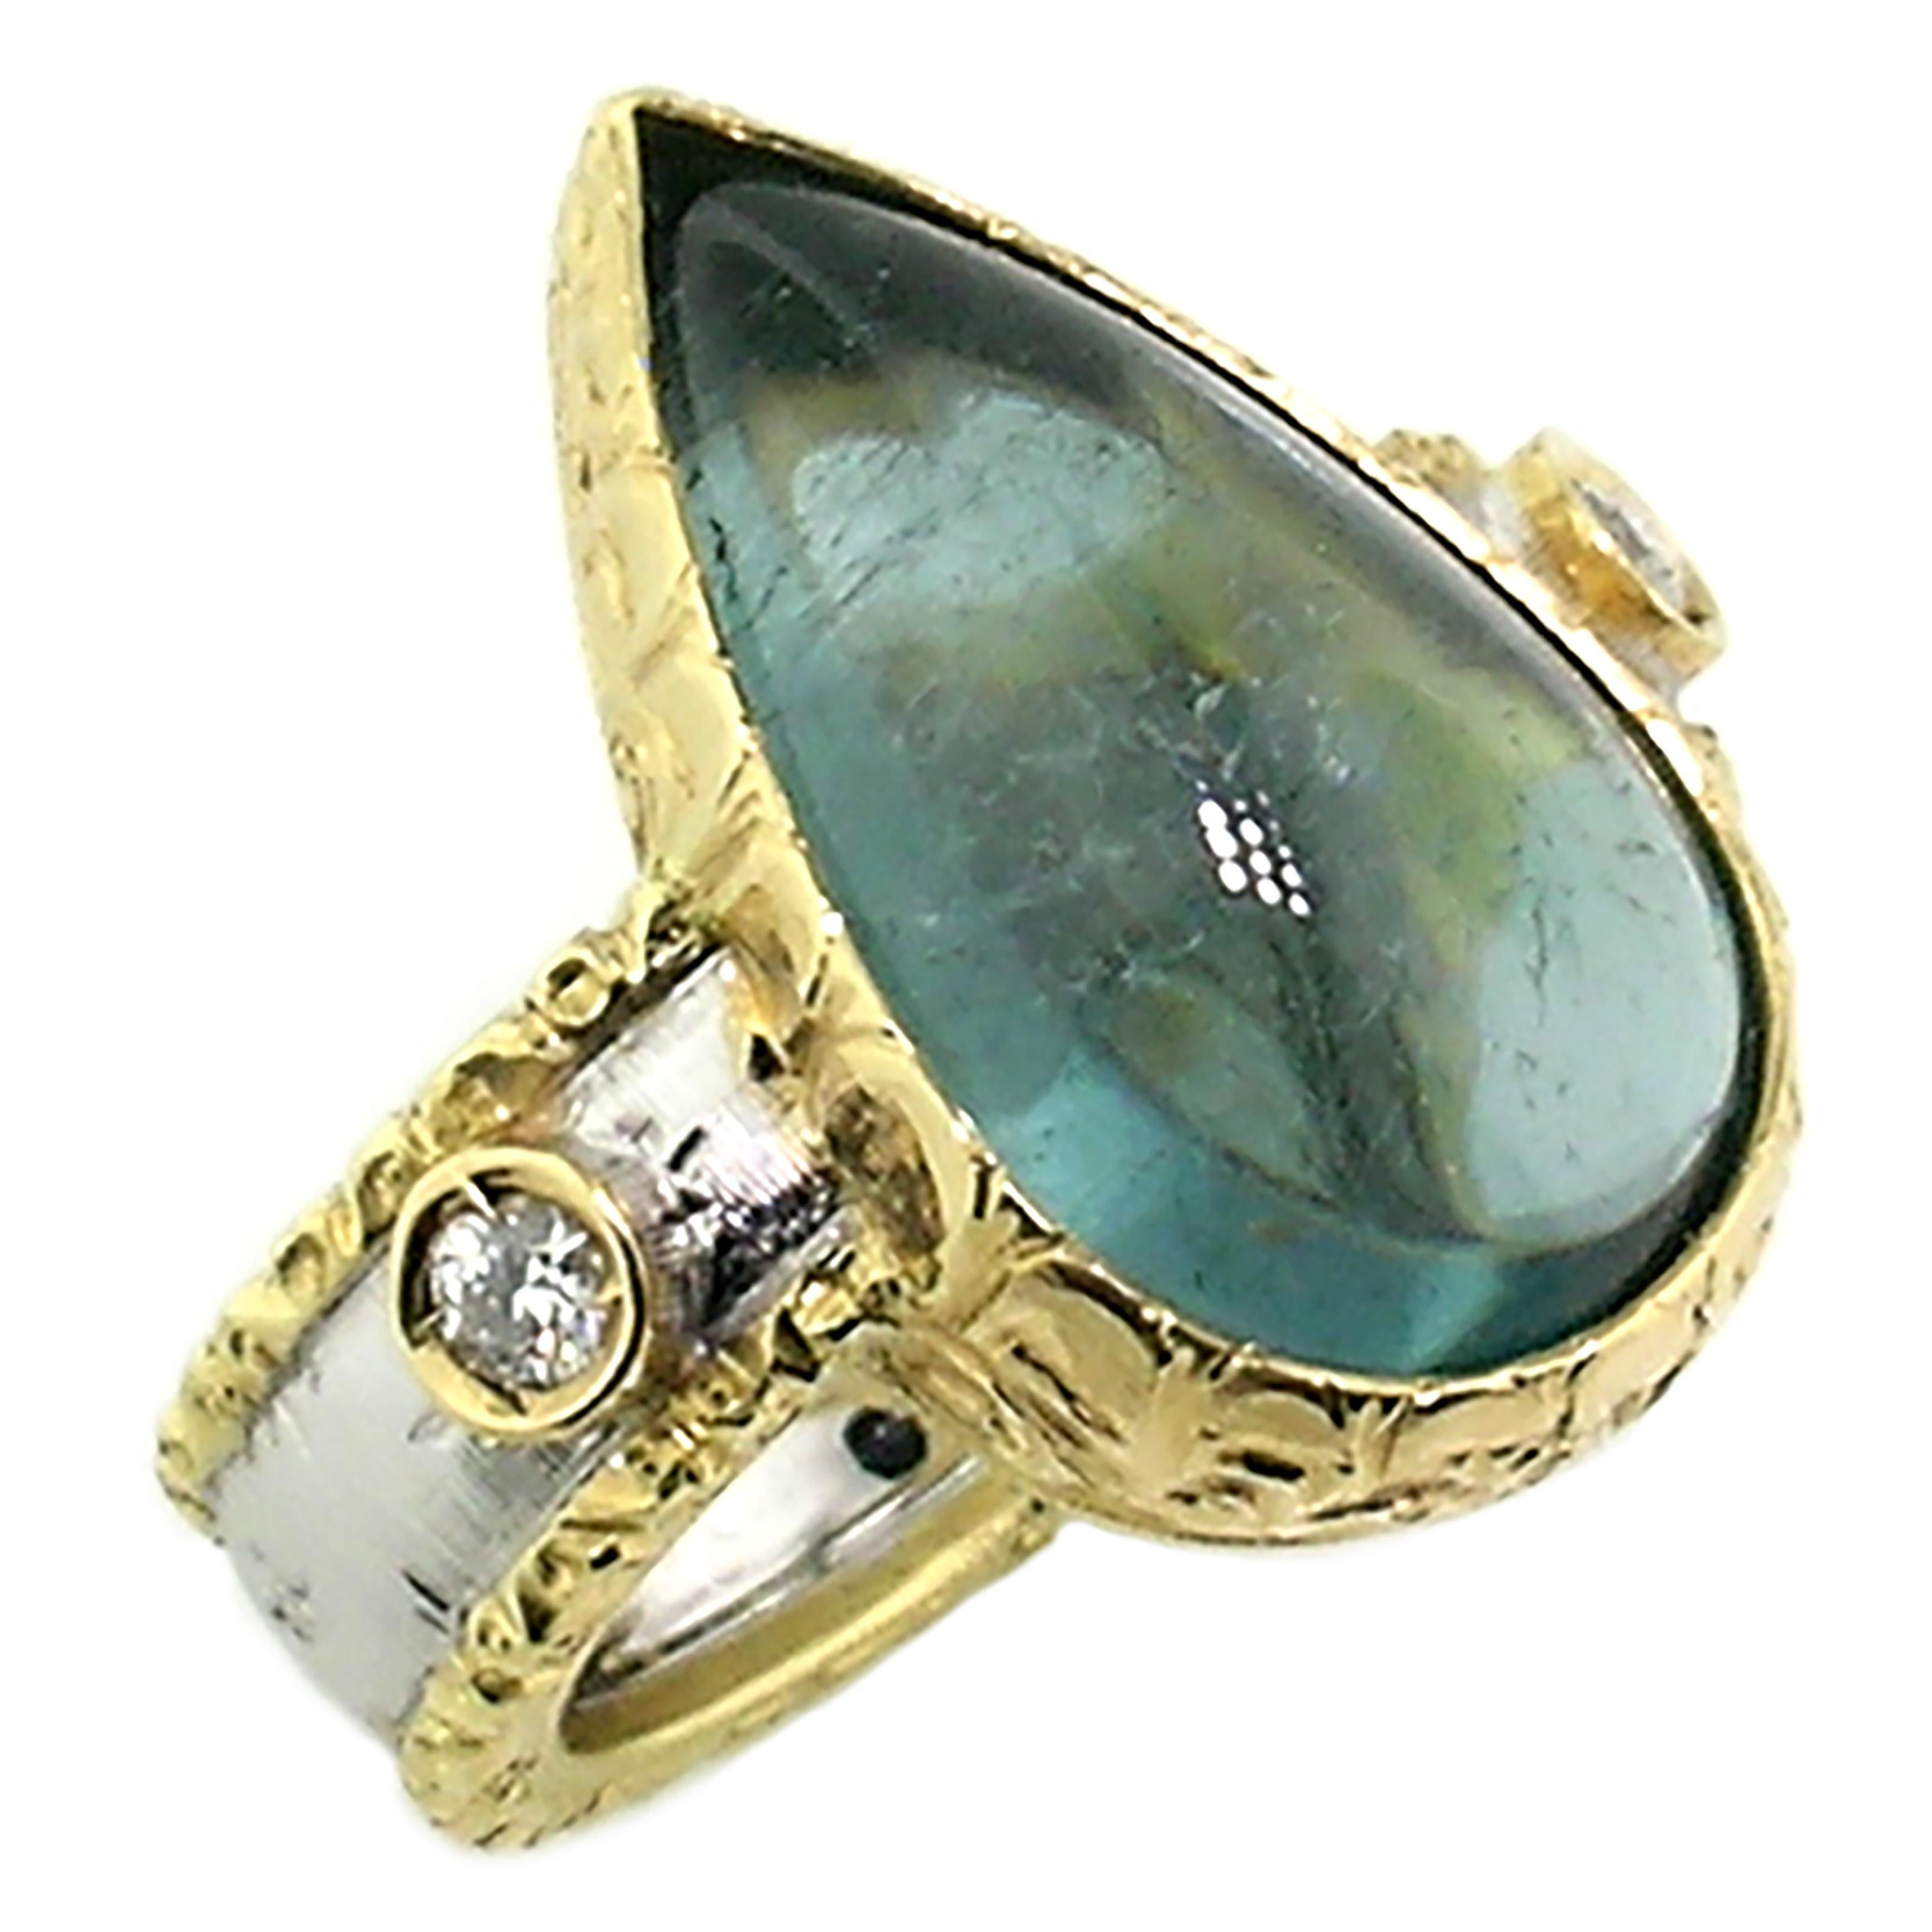 8.86ct Blue Tourmaline and Diamond 18kt Gold Ring Made in Italy by Cynthia Scott